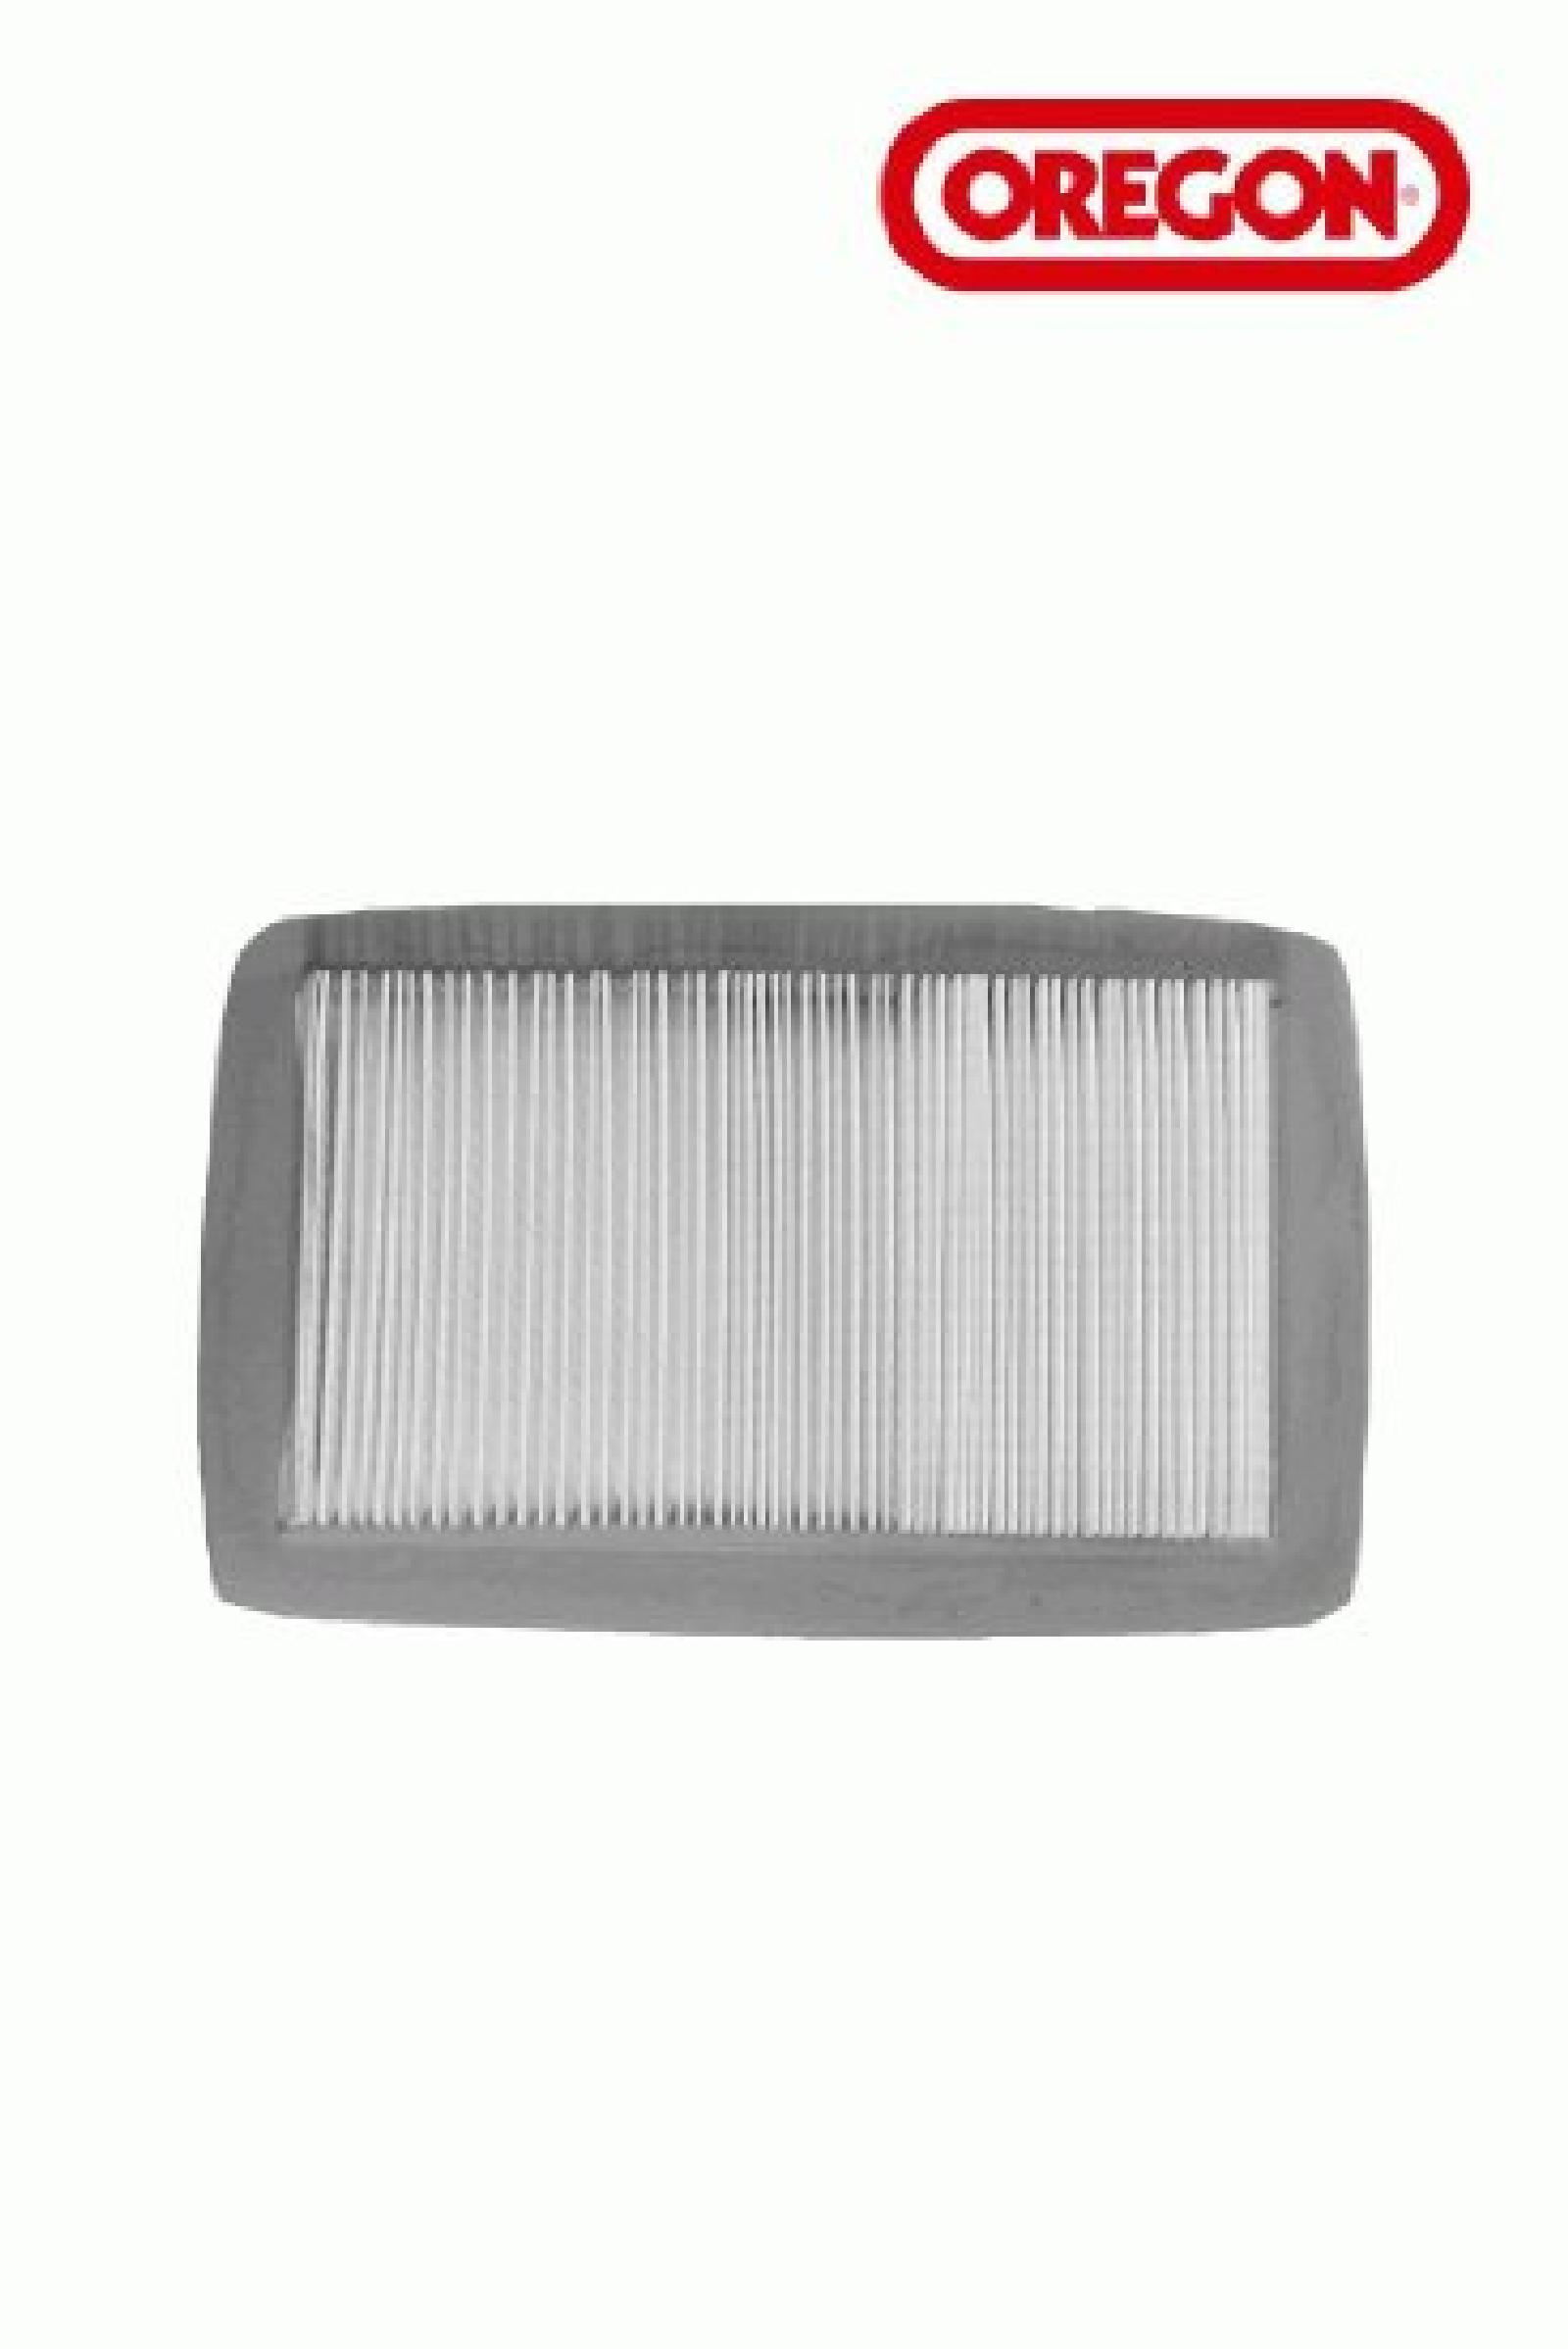 AIR FILTER RED MAX part# 30-068 by Oregon